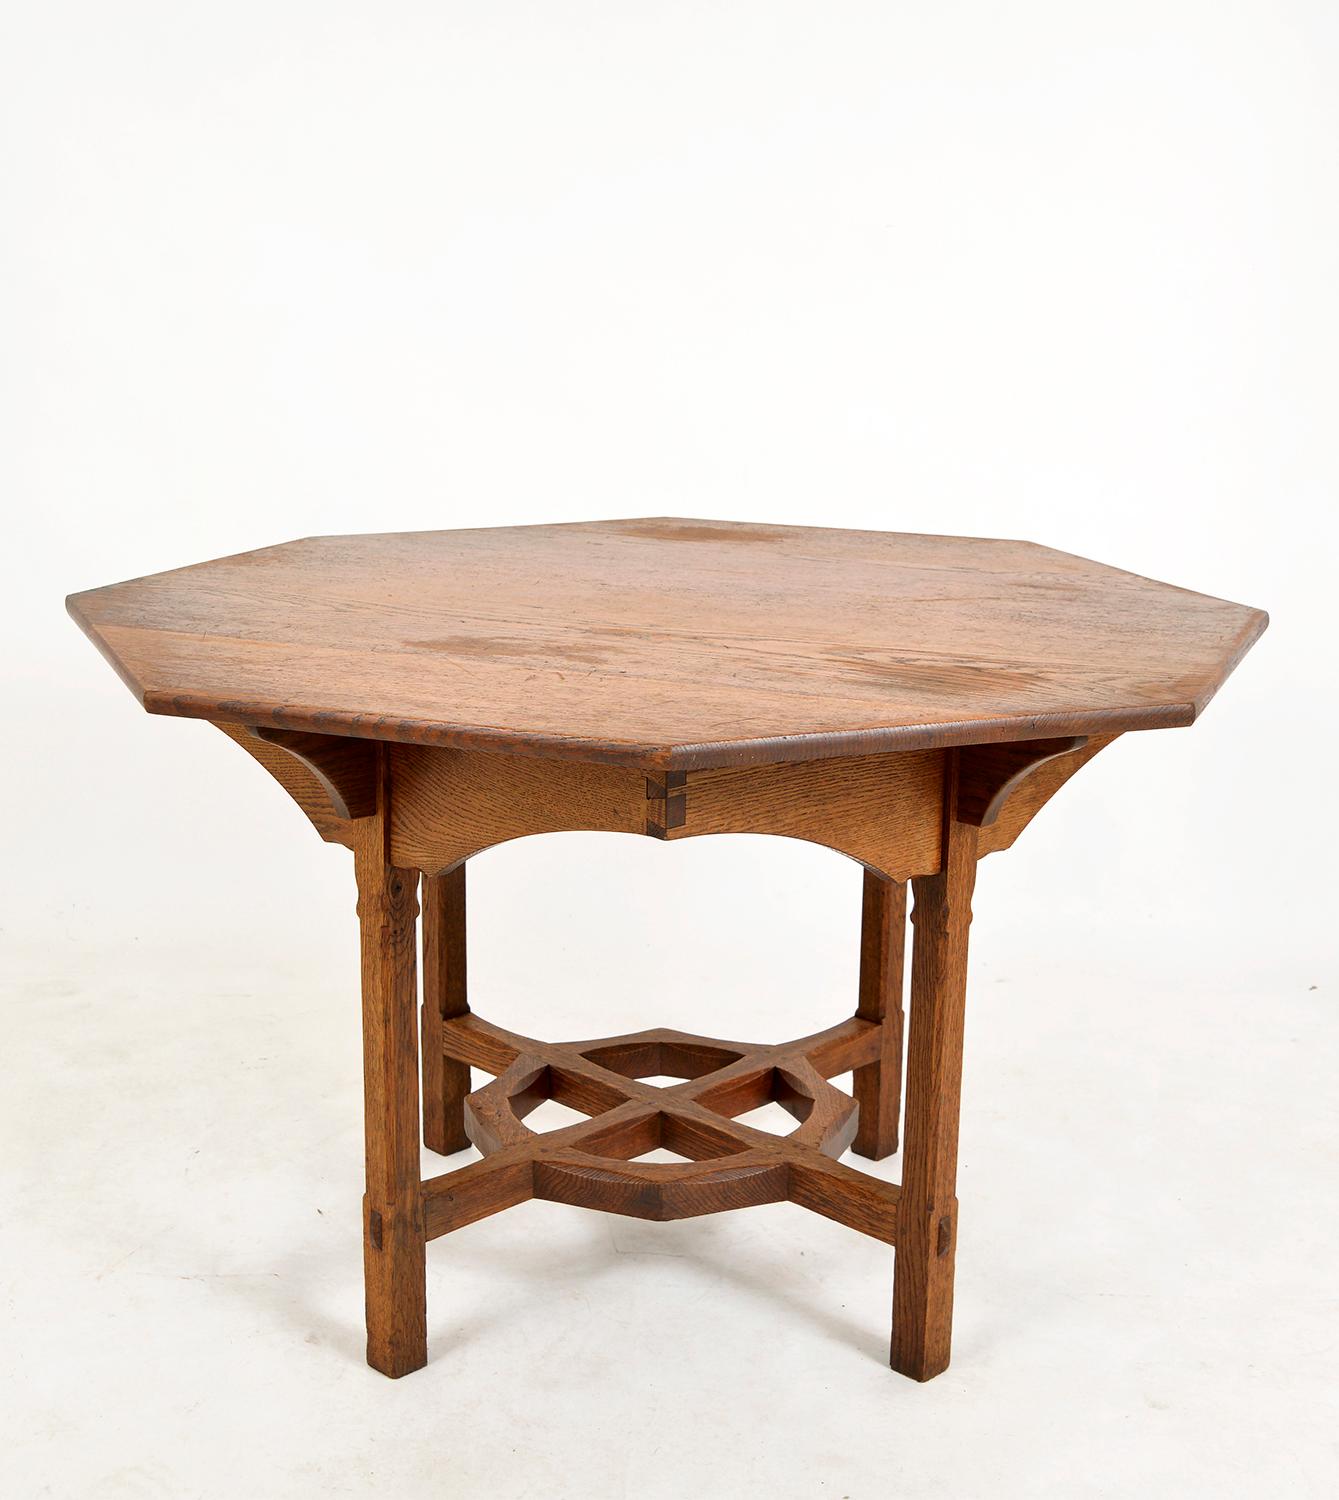 A rare, beautifully hand crafted solid oak octagonal table dating from the early 20th century, purportedly from the workshop of Gordon Russell in Broadway. Constructed entirely from beautifully figured, quarter sawn English oak which now shows a